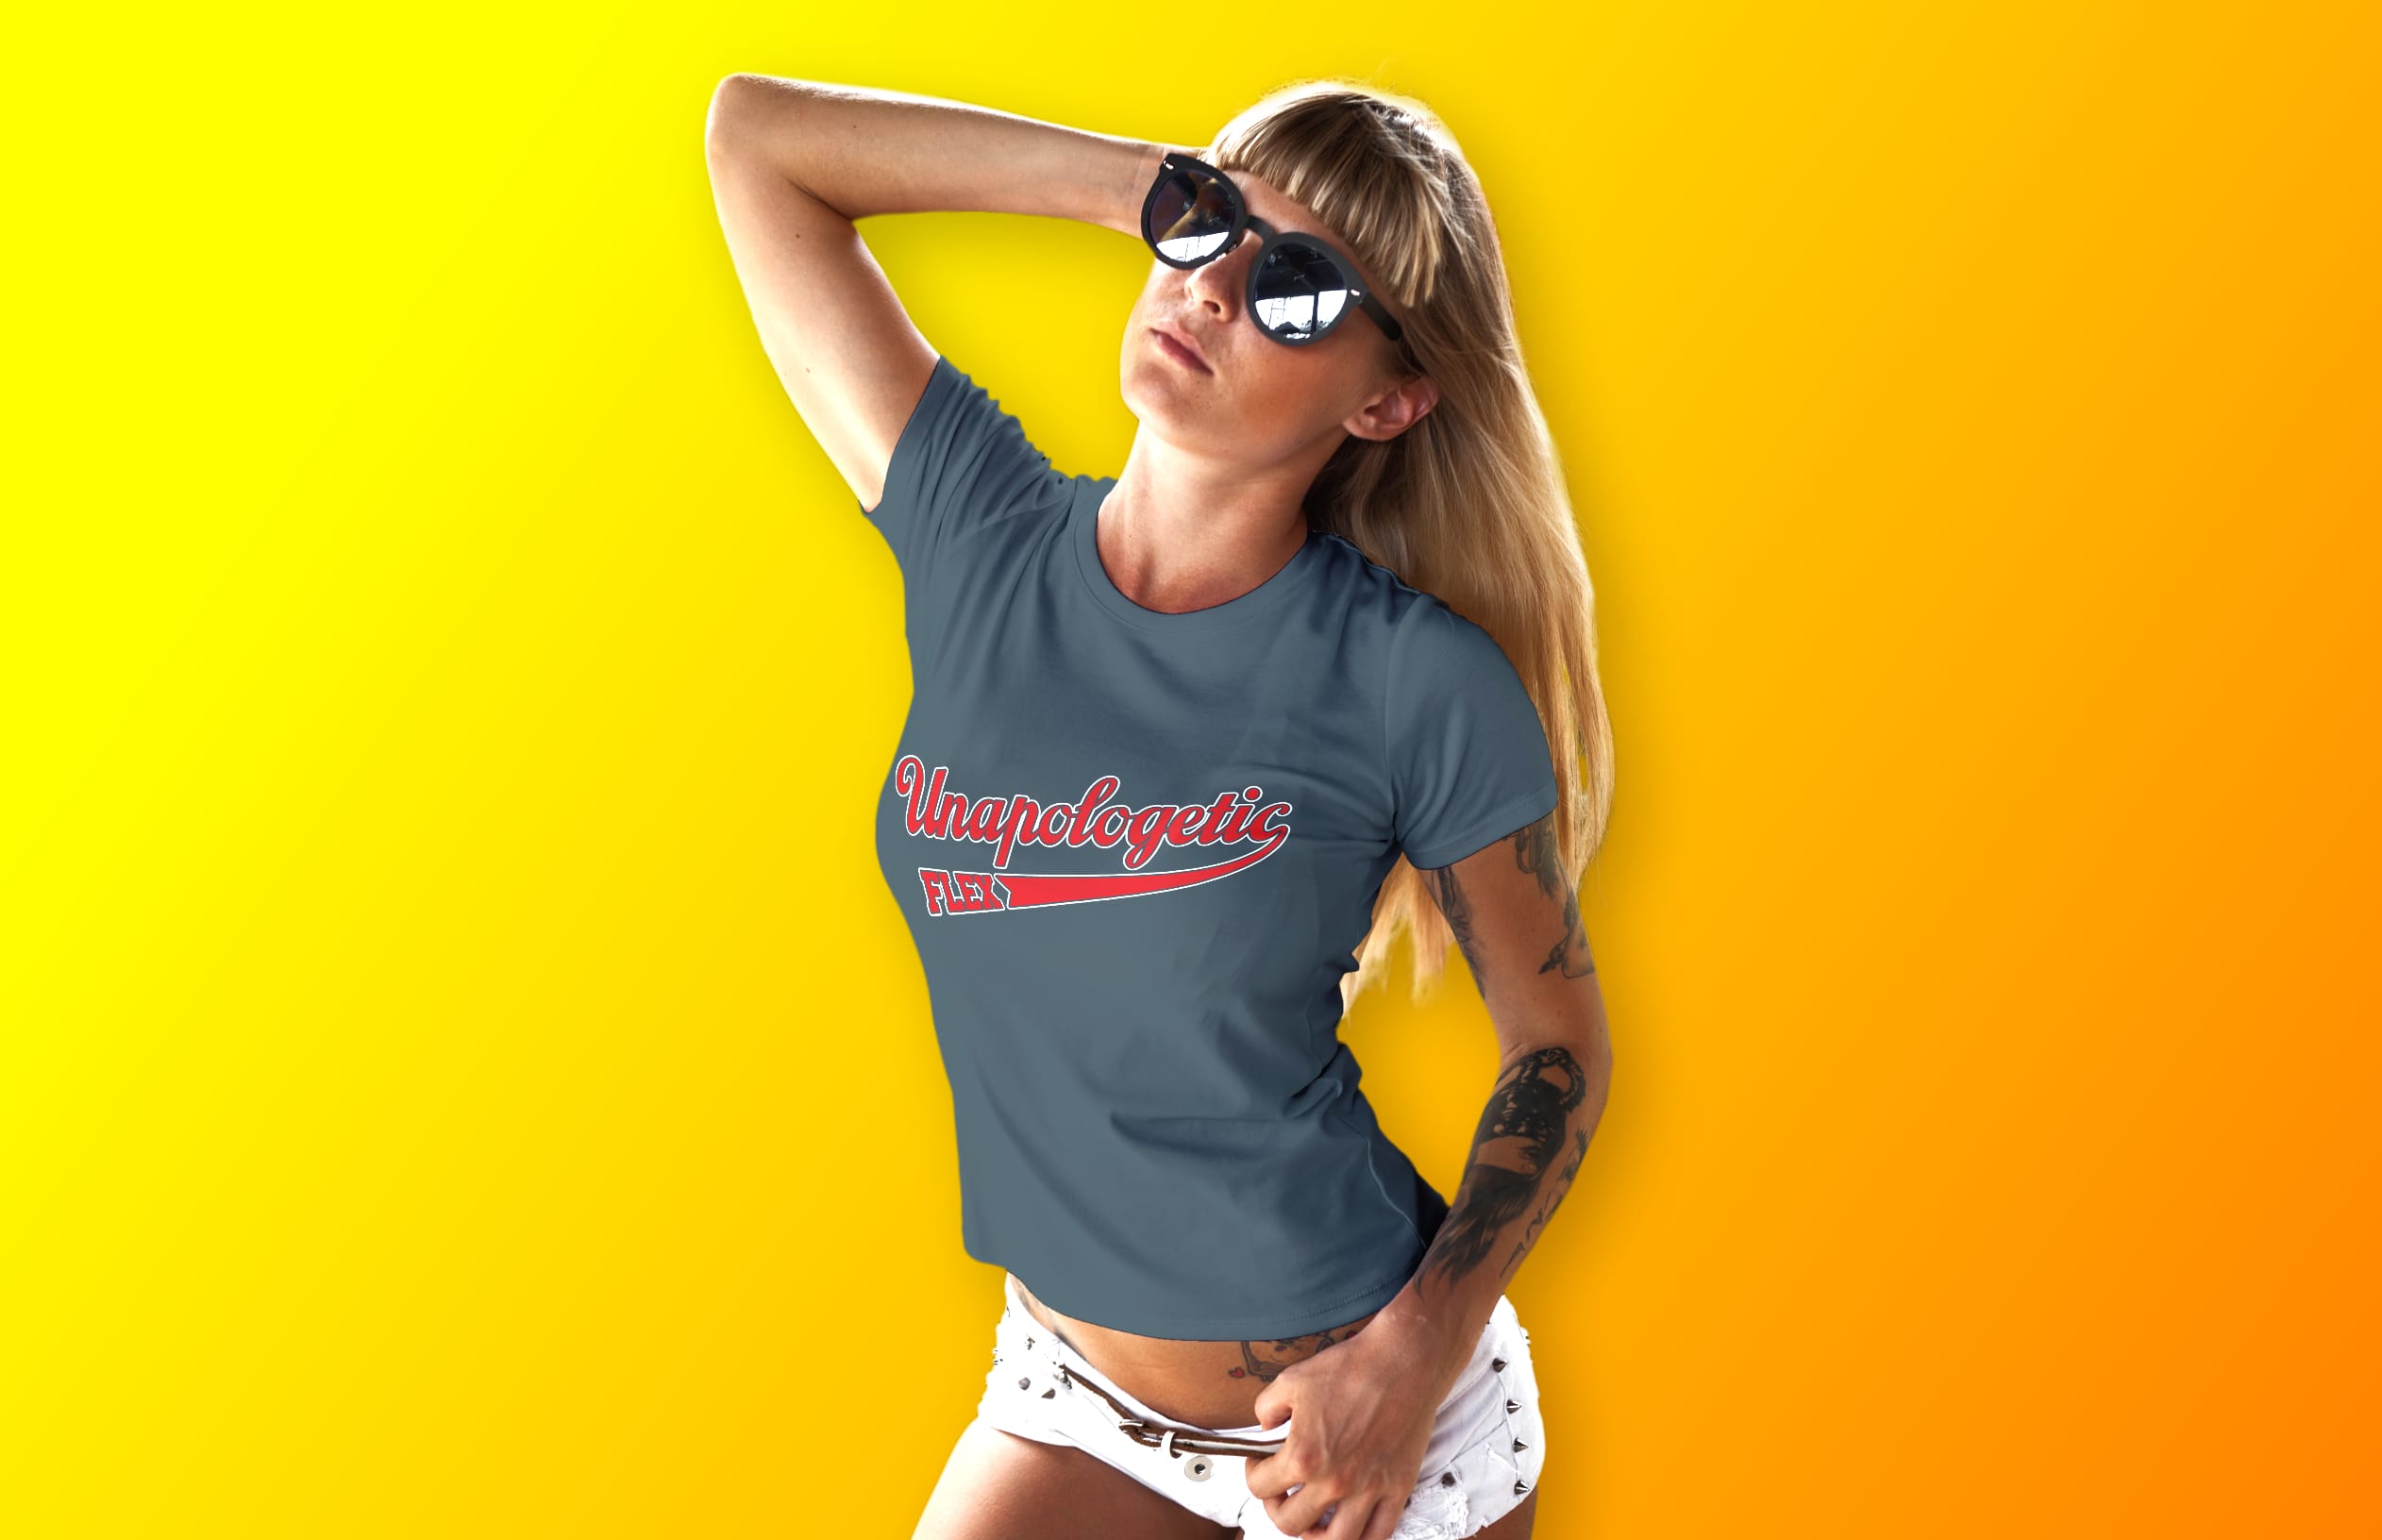 lady wearing unapologetic flex t-shirt